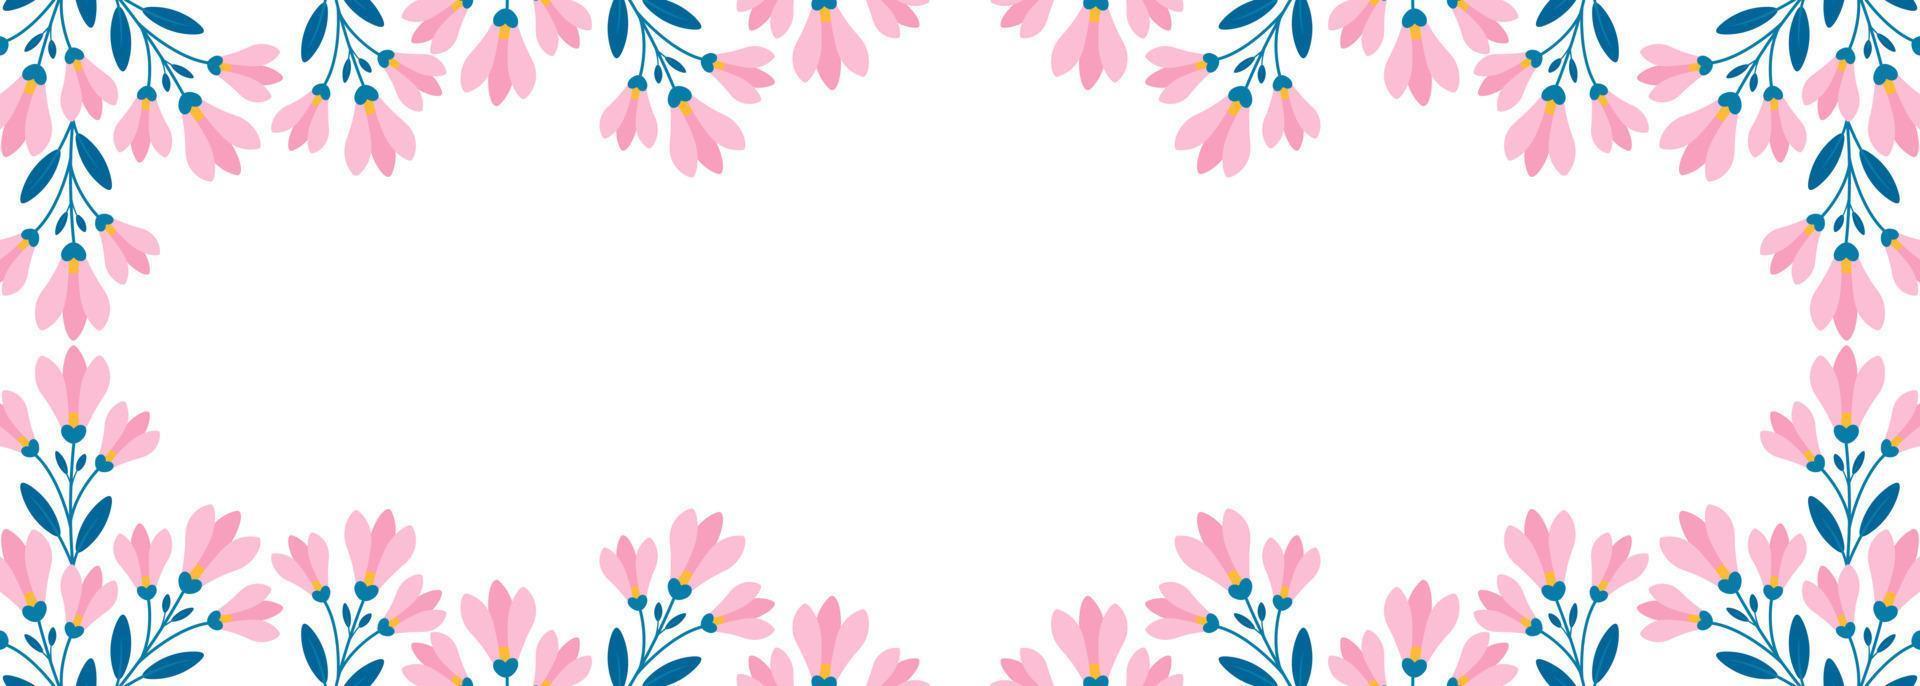 Floral horizontal border, Twigs with pink flowers and leaves in flat style. Vector template